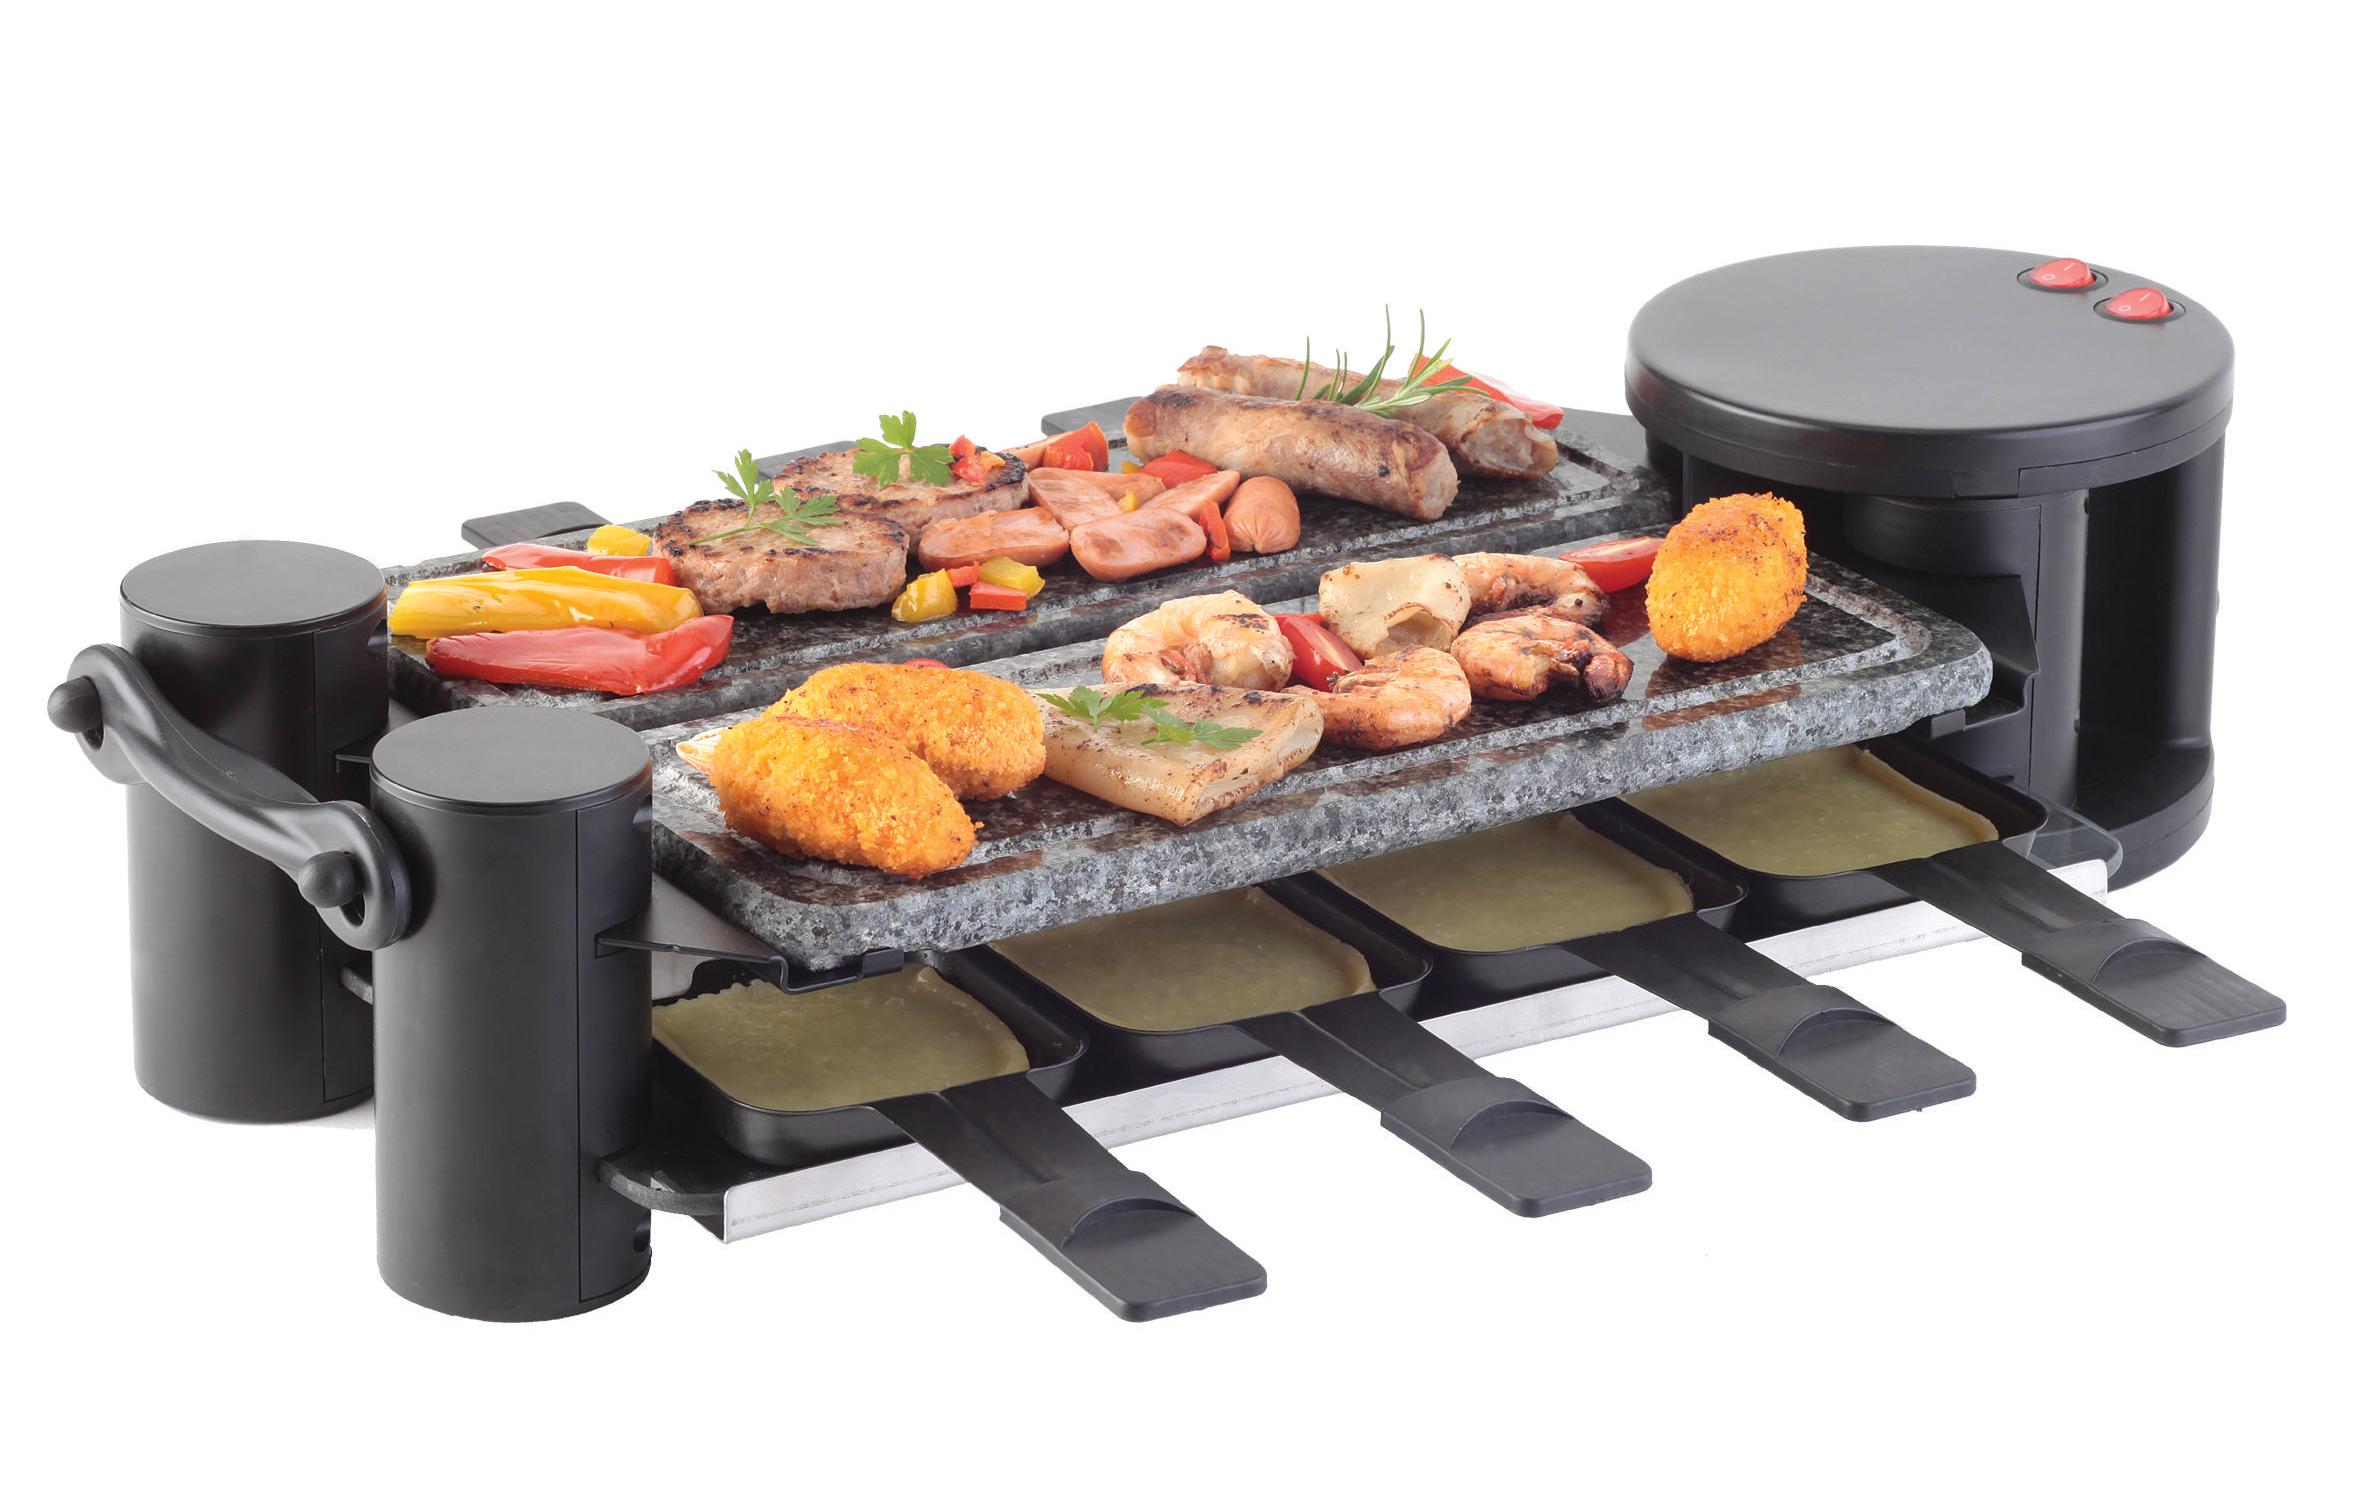 OHMEX Raclette-Grill 5800 8 Personen